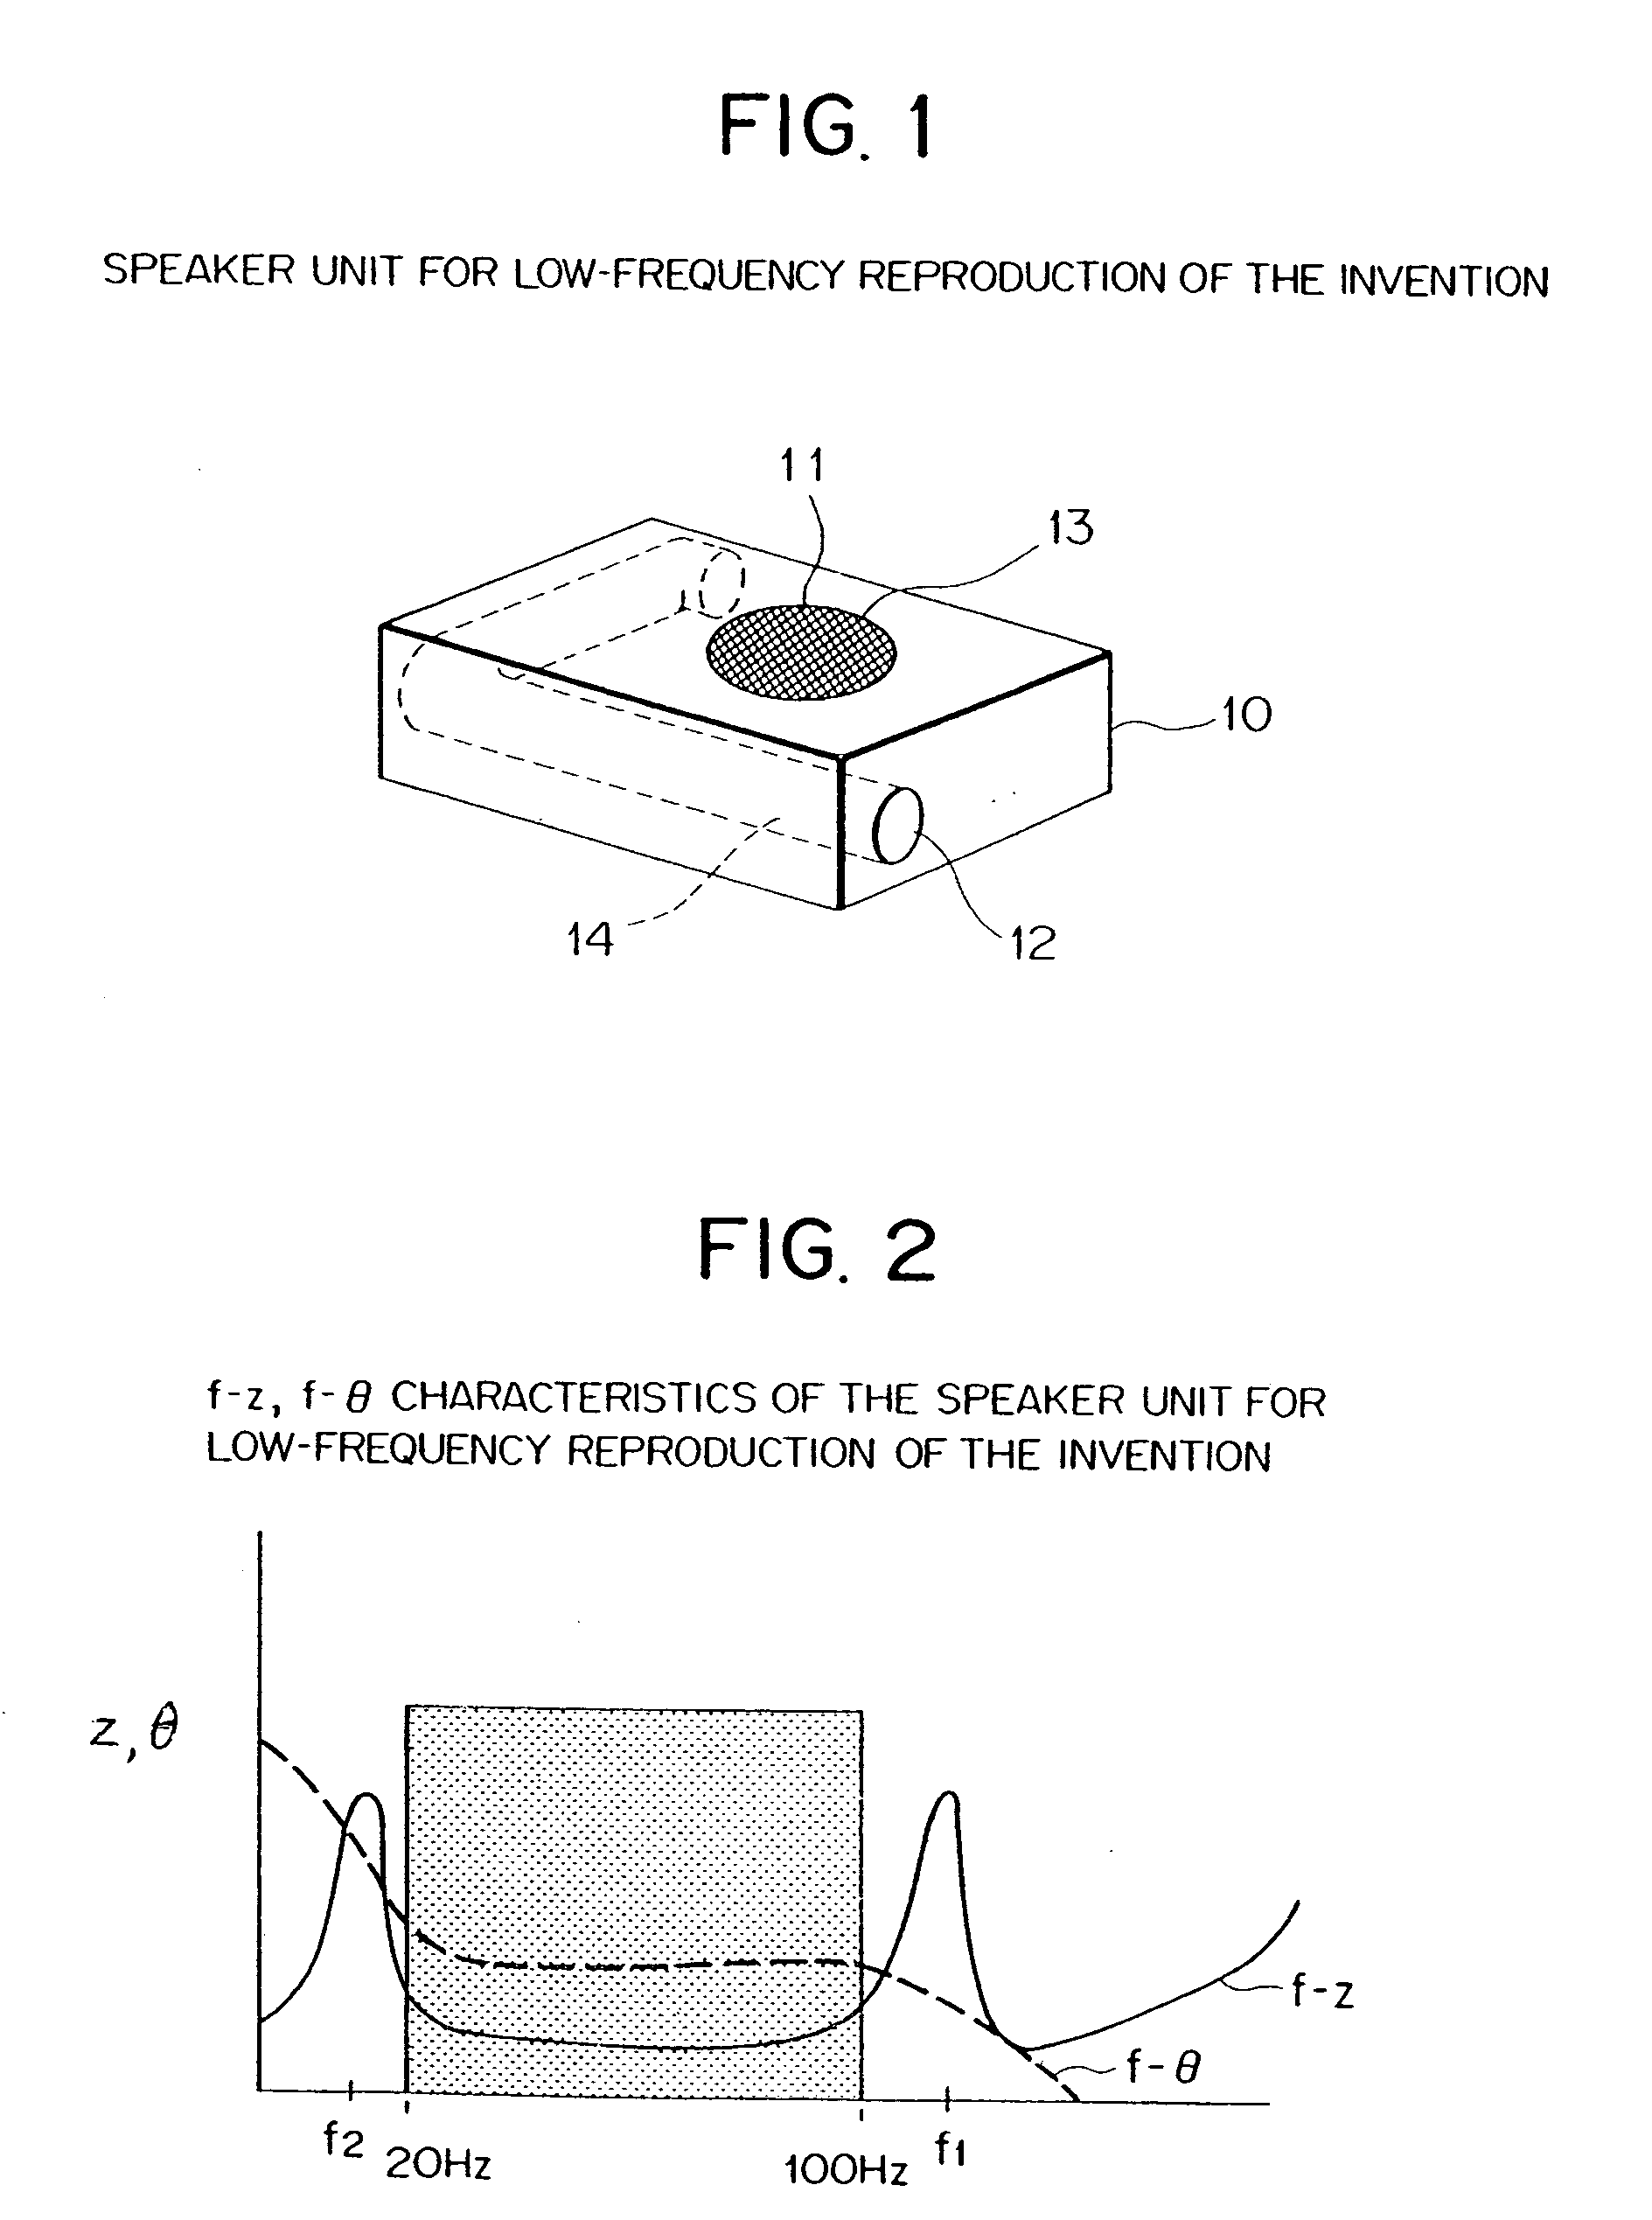 Speaker unit for low frequency reproduction